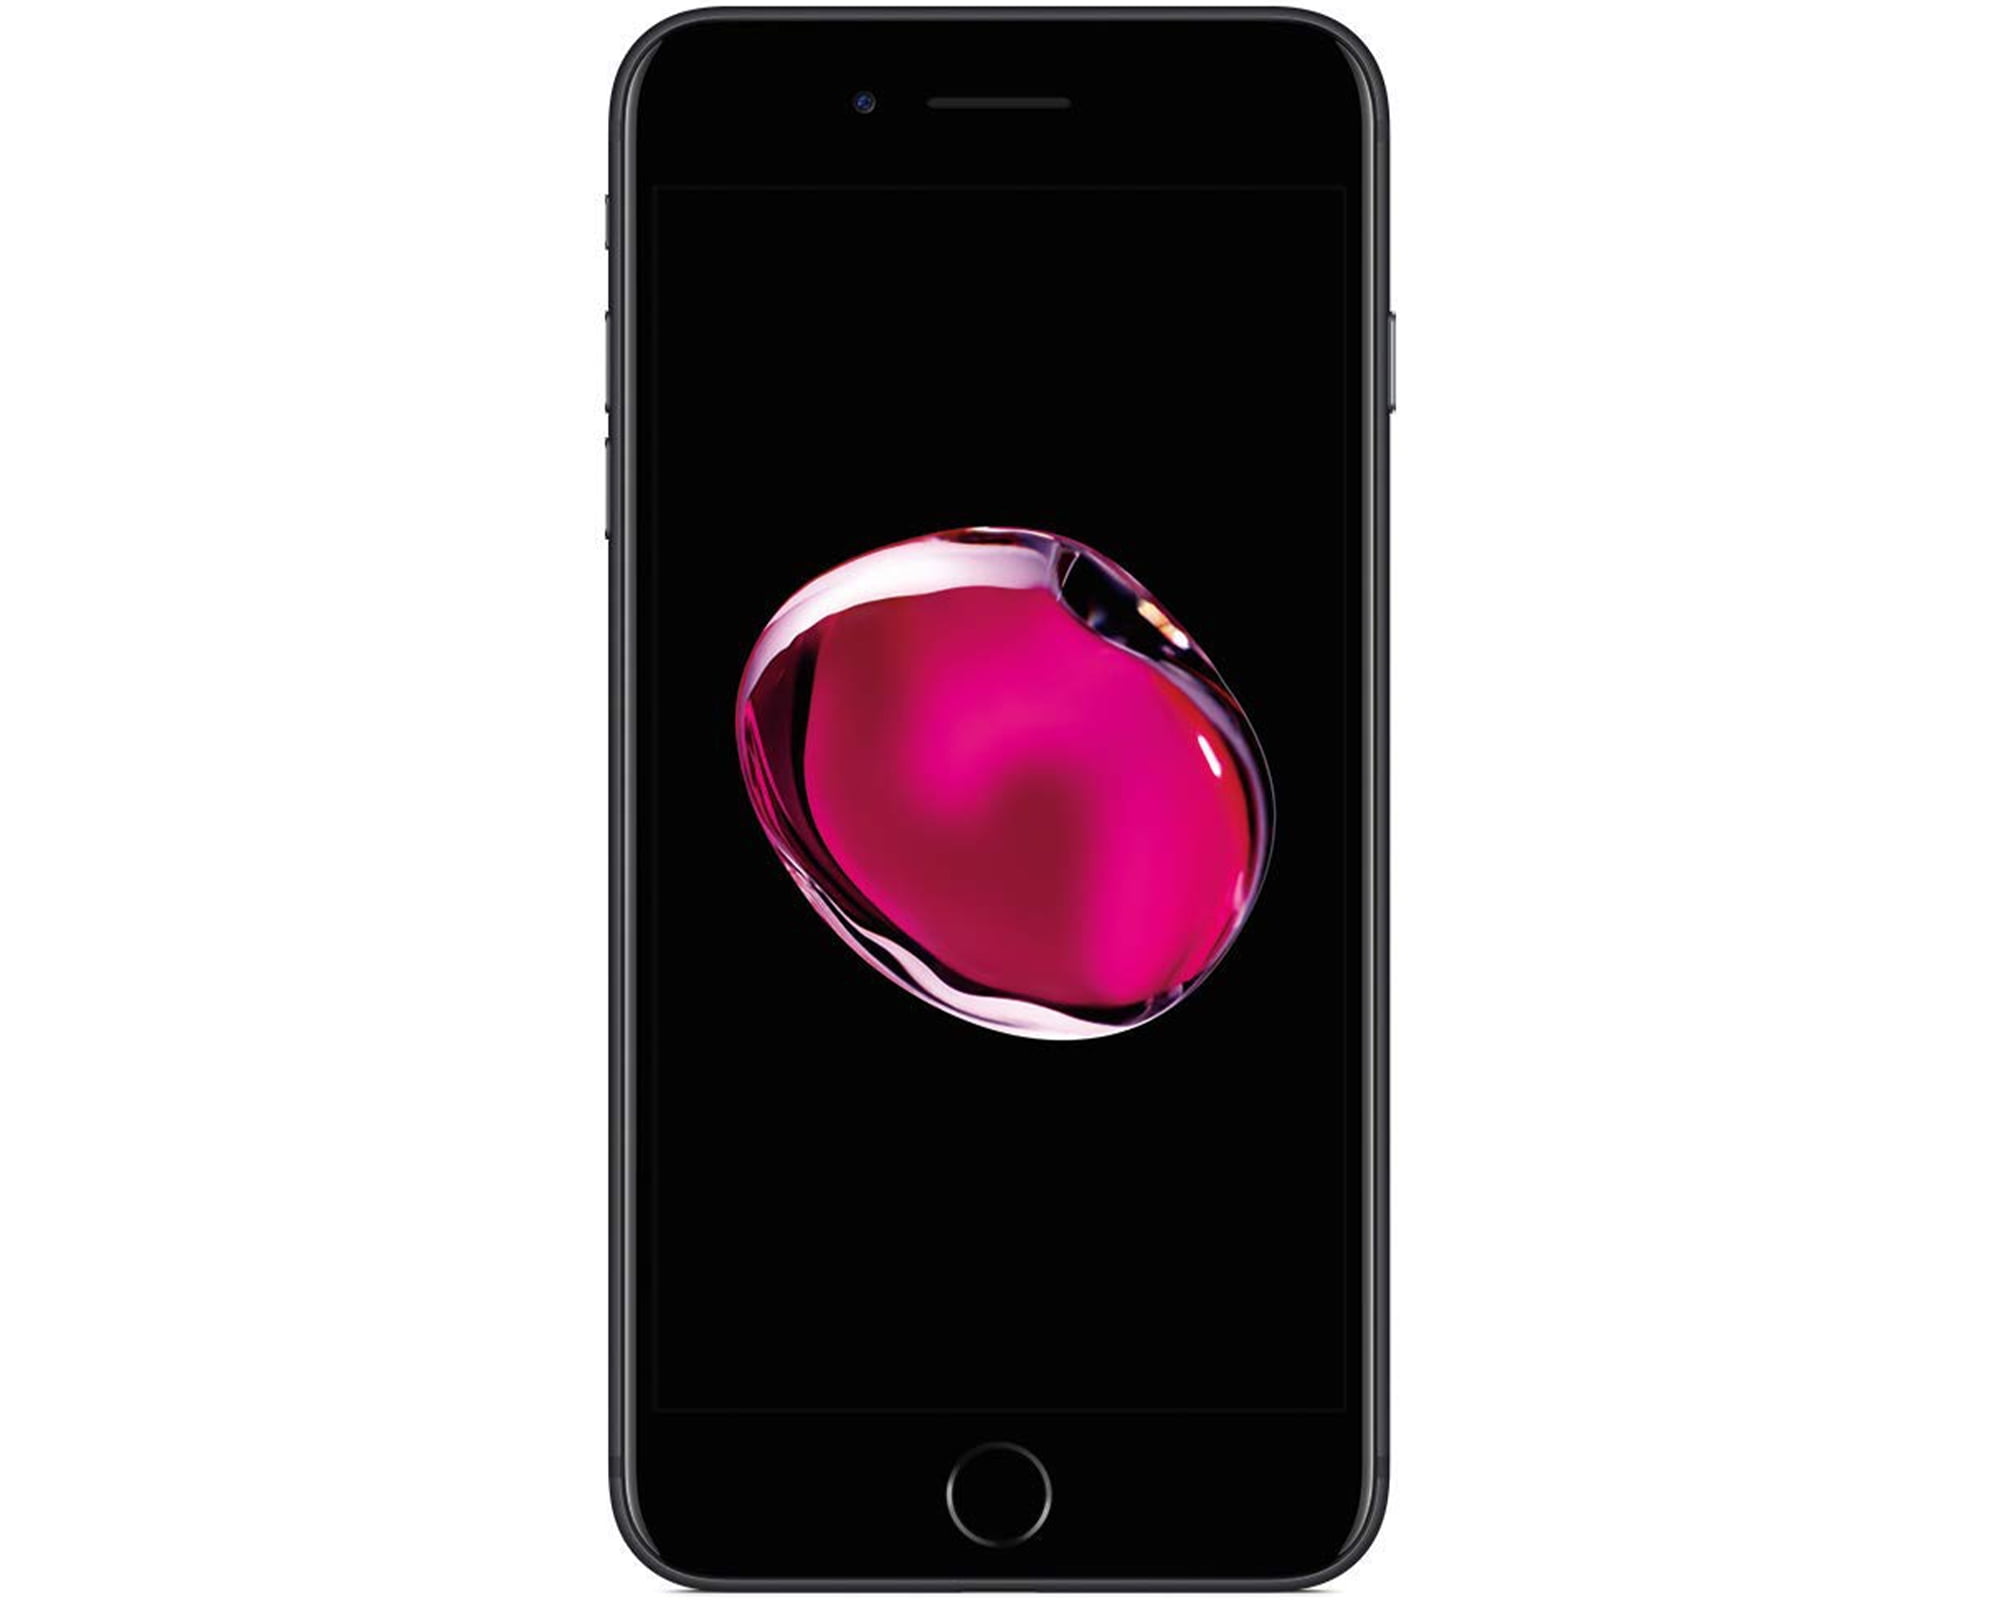 Apple iPhone 7 32GB Unlocked GSM 4G LTE Quad-Core Smartphone with 